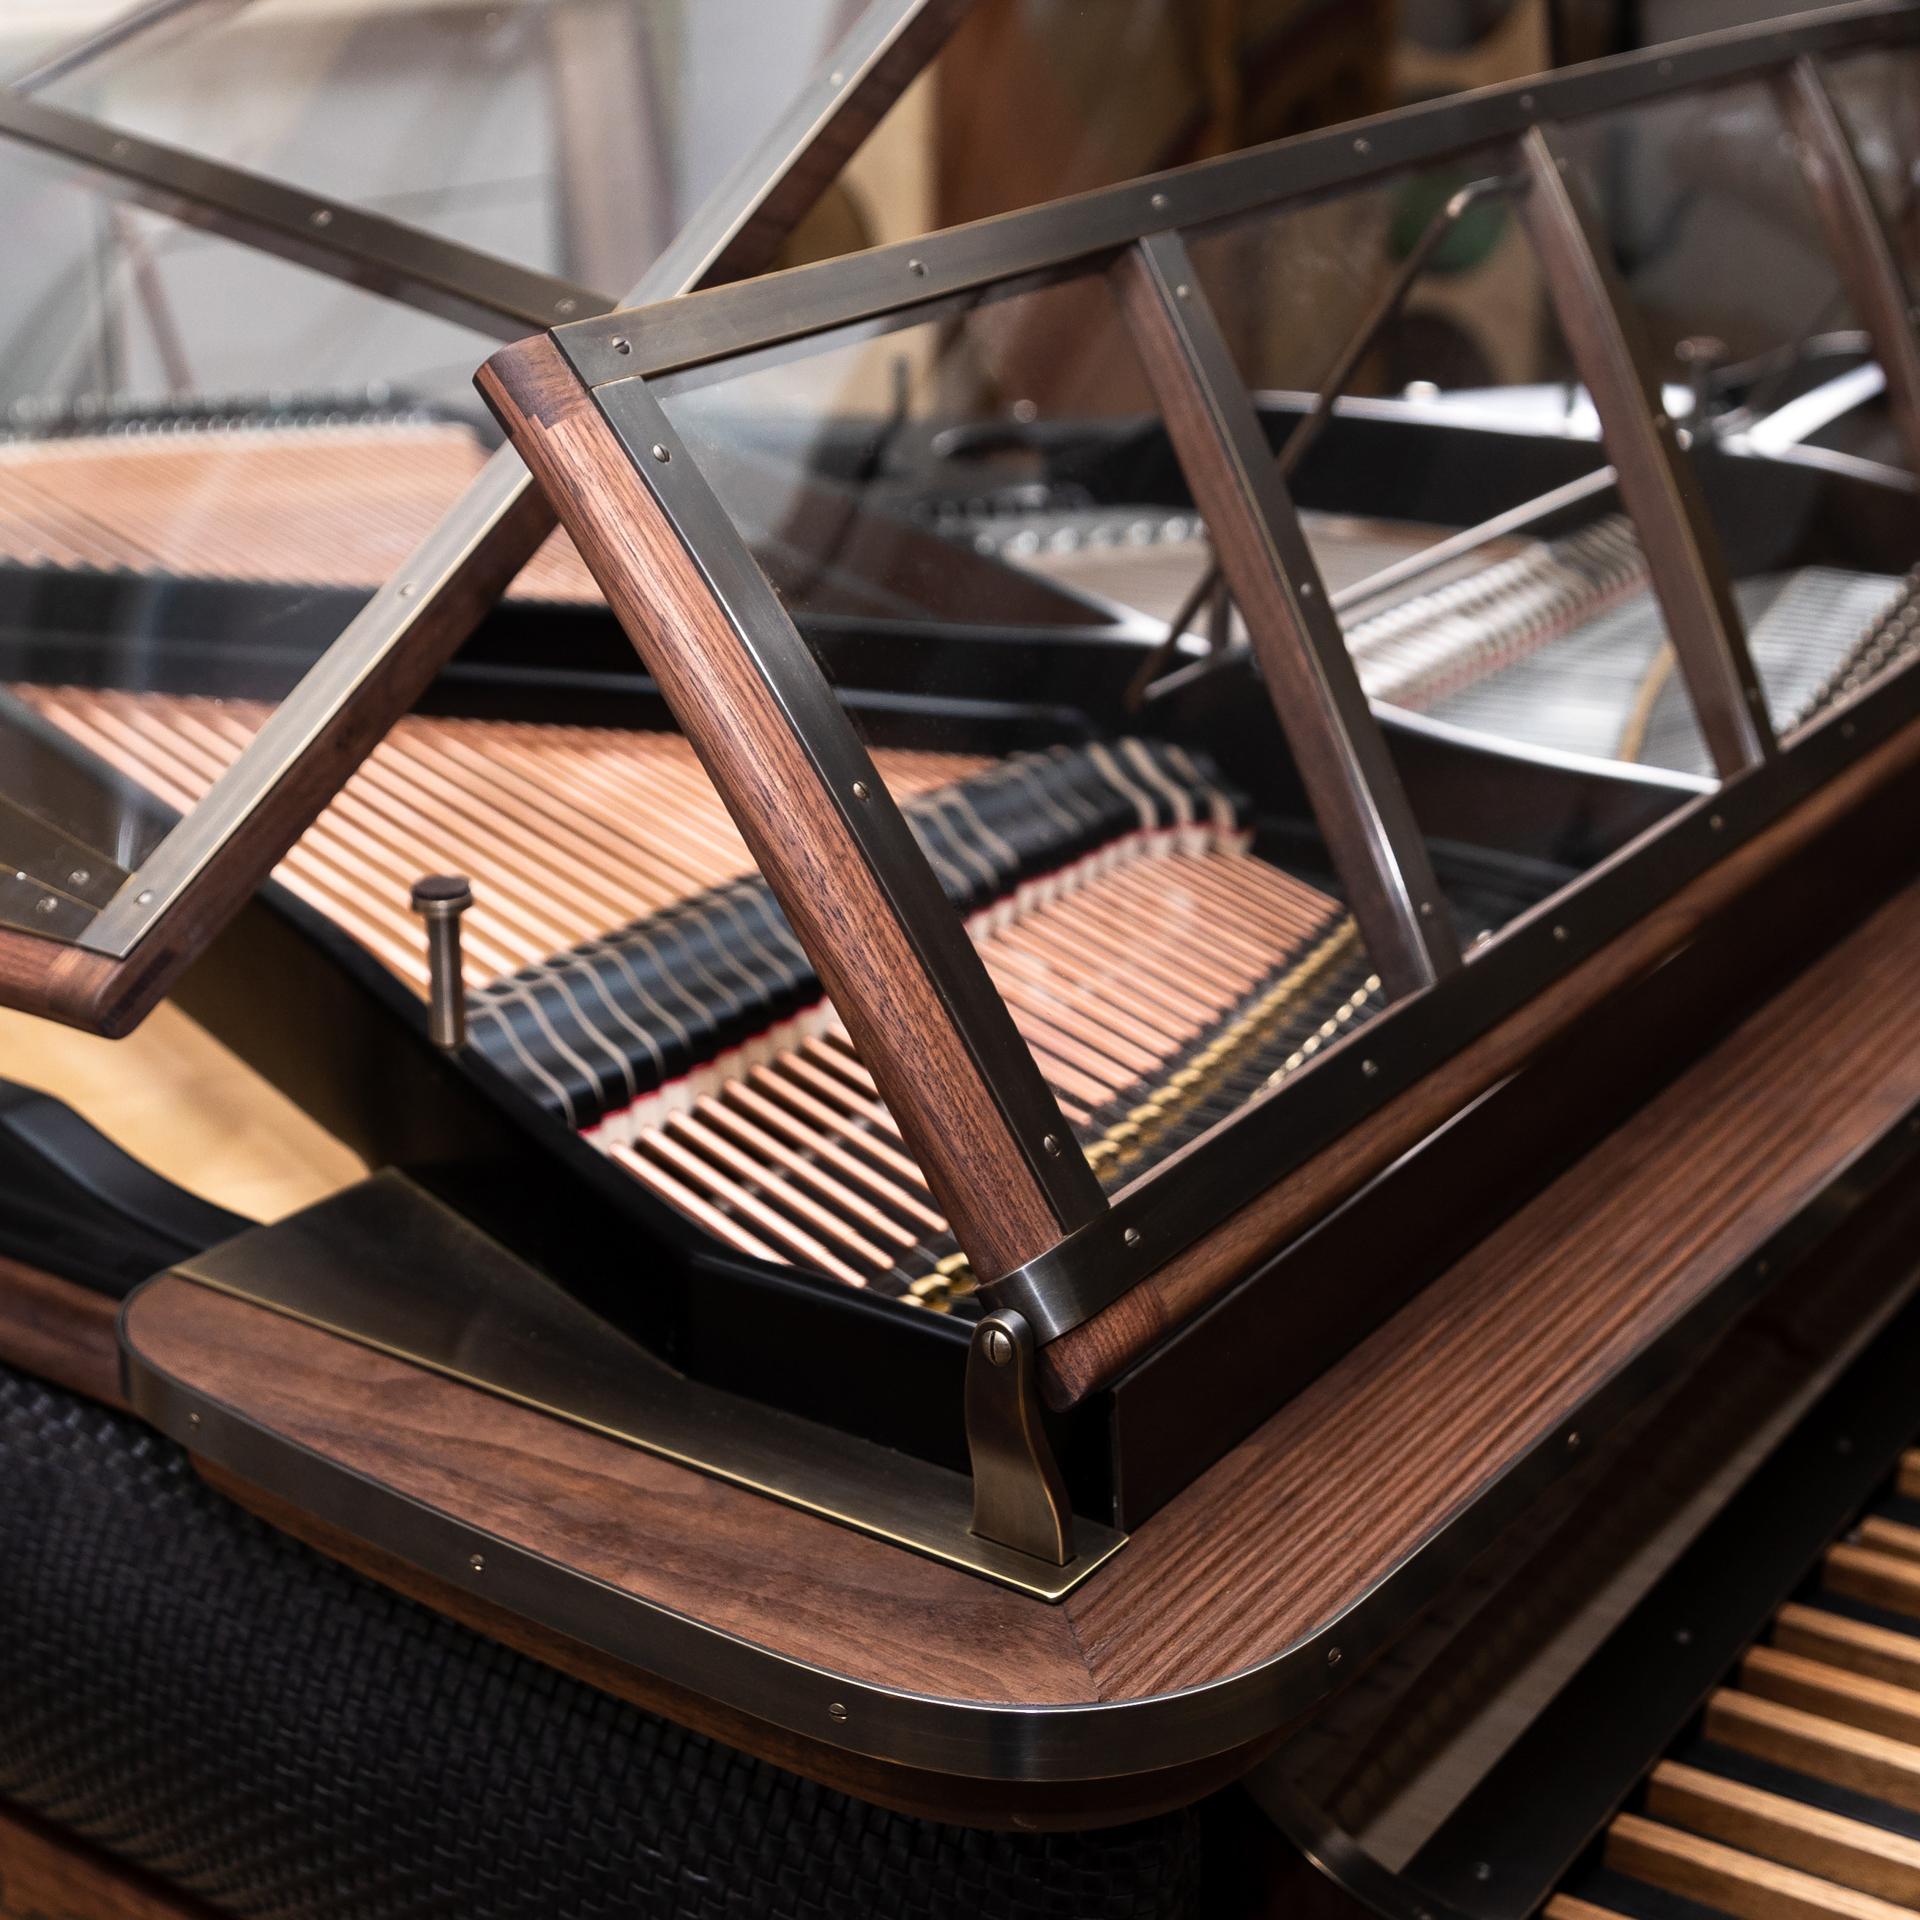 - All prices are listed ex works.
- 5-year guarantee.
- We regularly crate, ship, and install PH Pianos worldwide with full insurance.

Designed by Poul Henningsen in 1930, this is a special hand-made instrument with exquisite detailing.
This